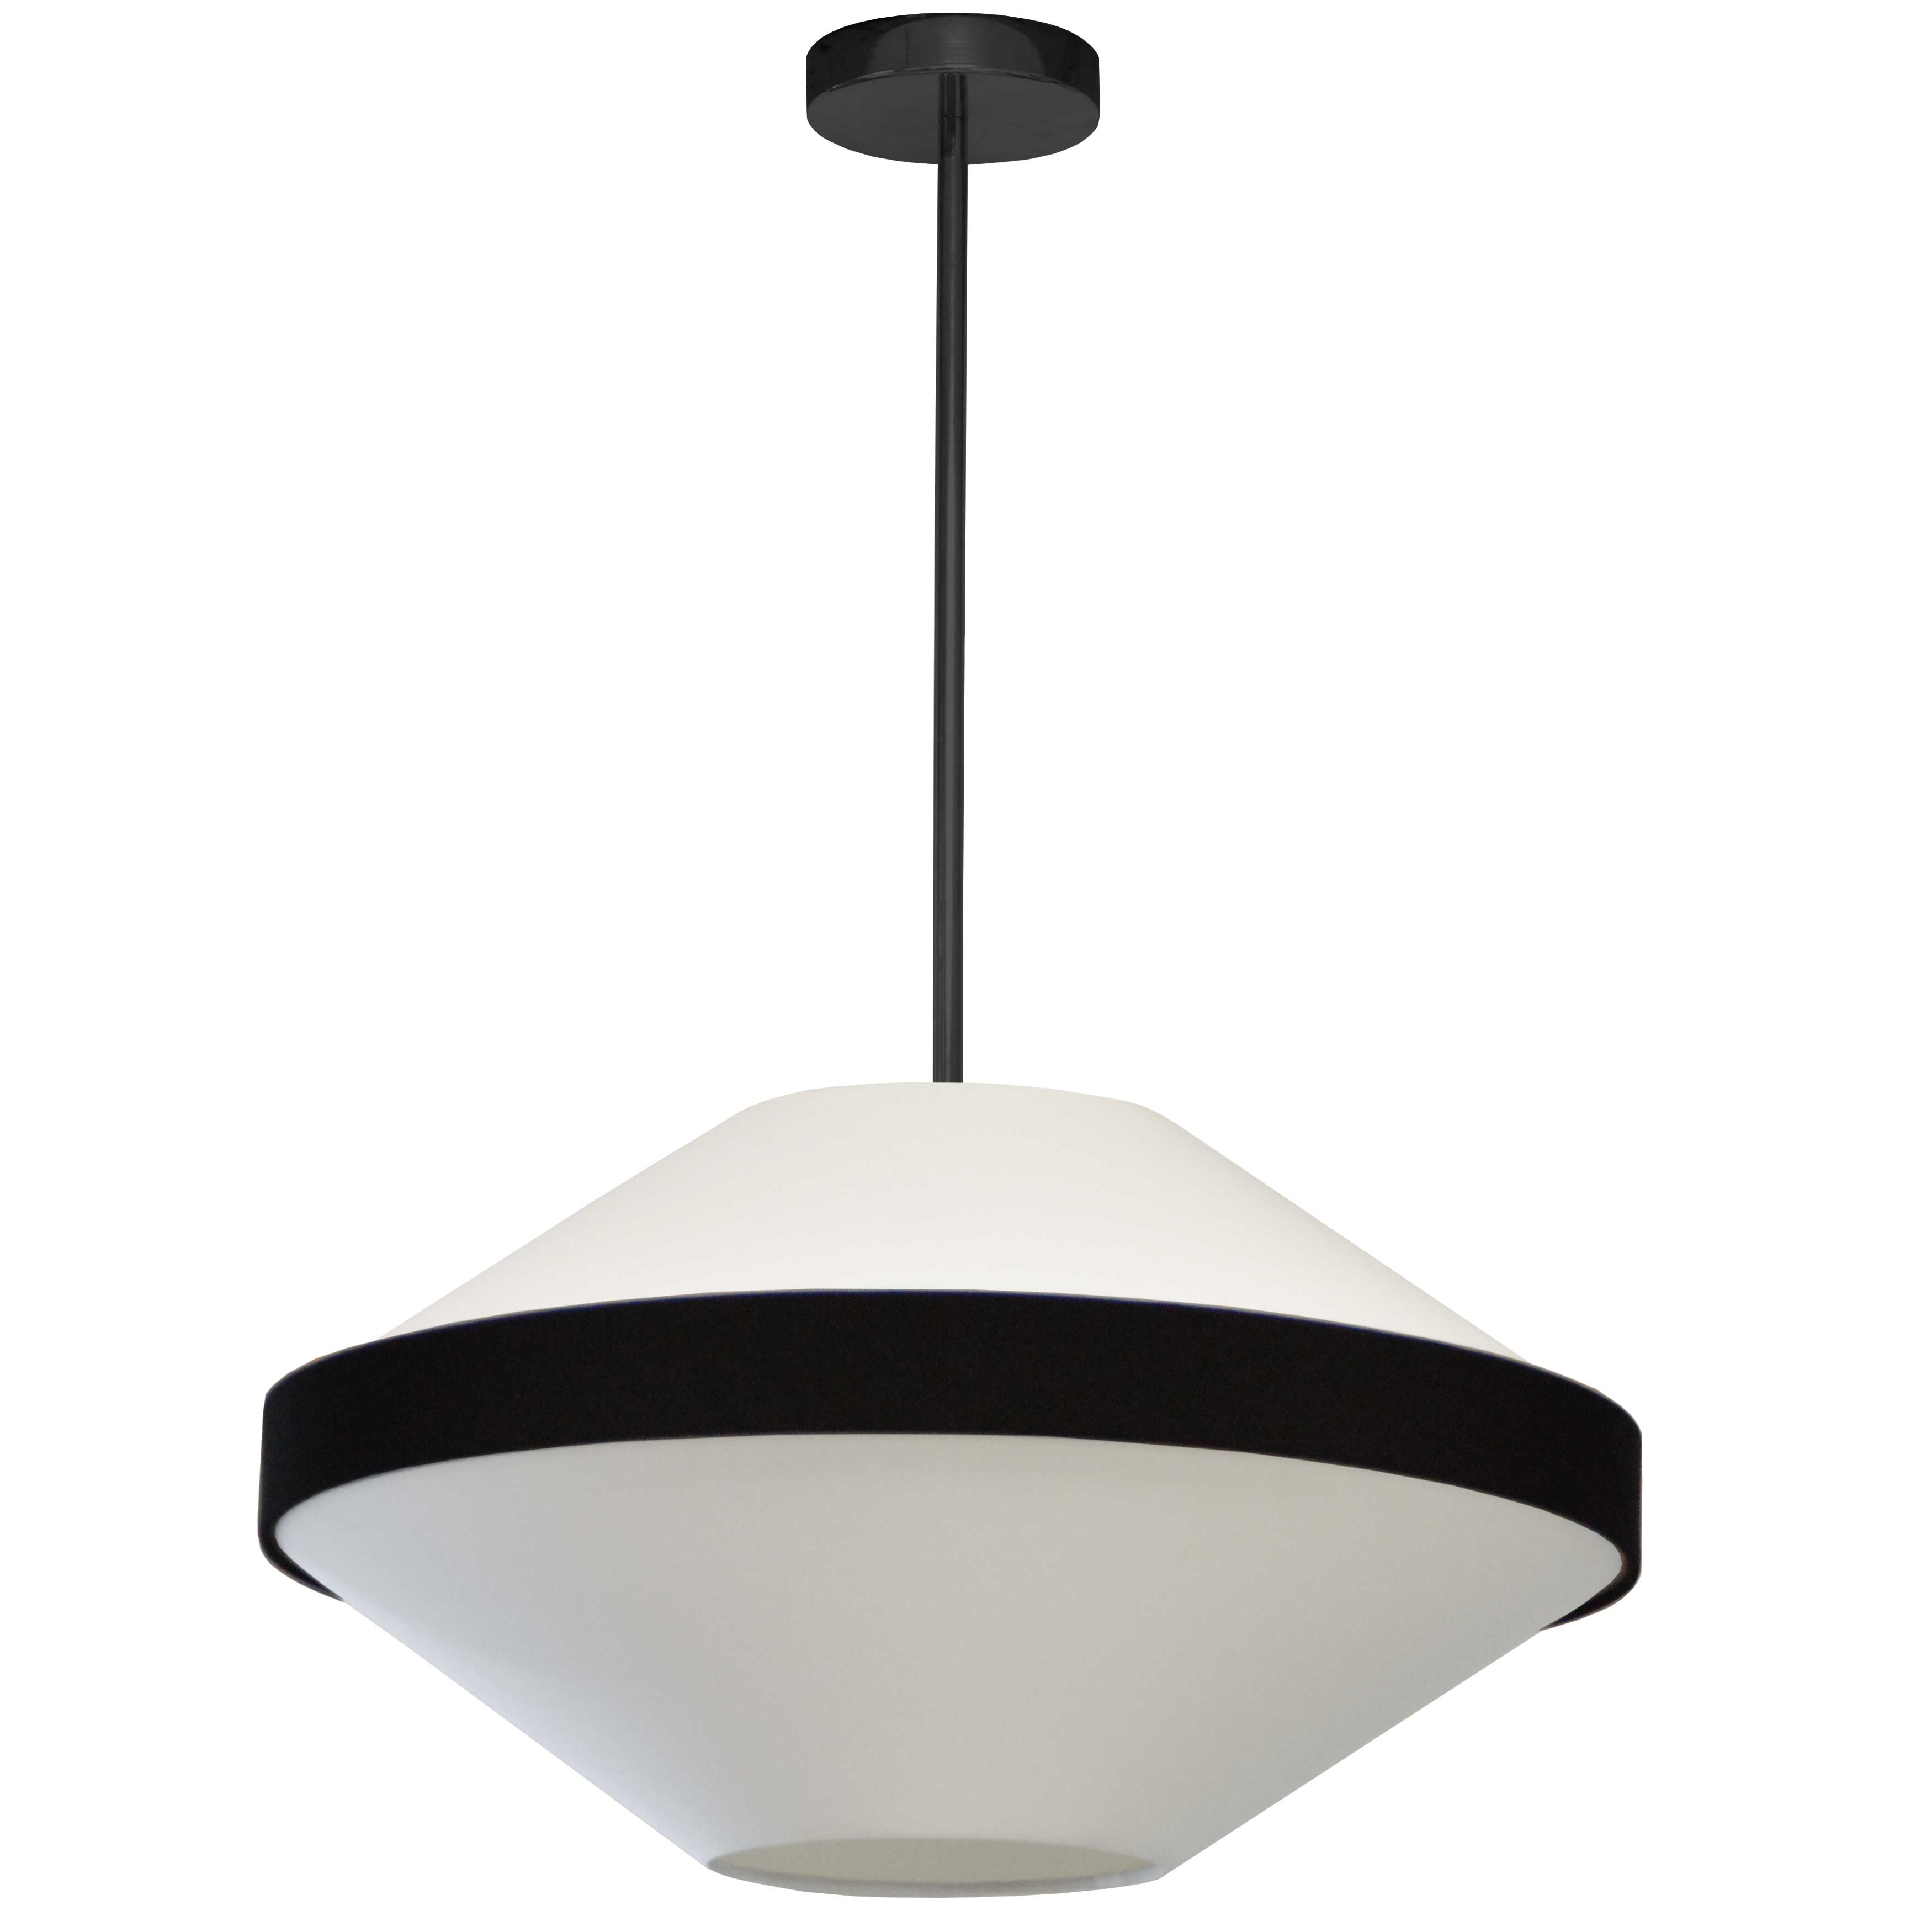 Incorporating elements of both classic and modern design, the Pietra family of lighting has a versatile and functional look. Based on clean lines and an intriguing shape, it's a design that is both functional and fashionable. The metal frame in a choice of finishes contrasts with the fabric shade that is tapered at both top and bottom. A band of metal around the middle adds a focal point. It's an understated look that's suitable for modern and transitional living rooms, bars, hallways and main entrances.